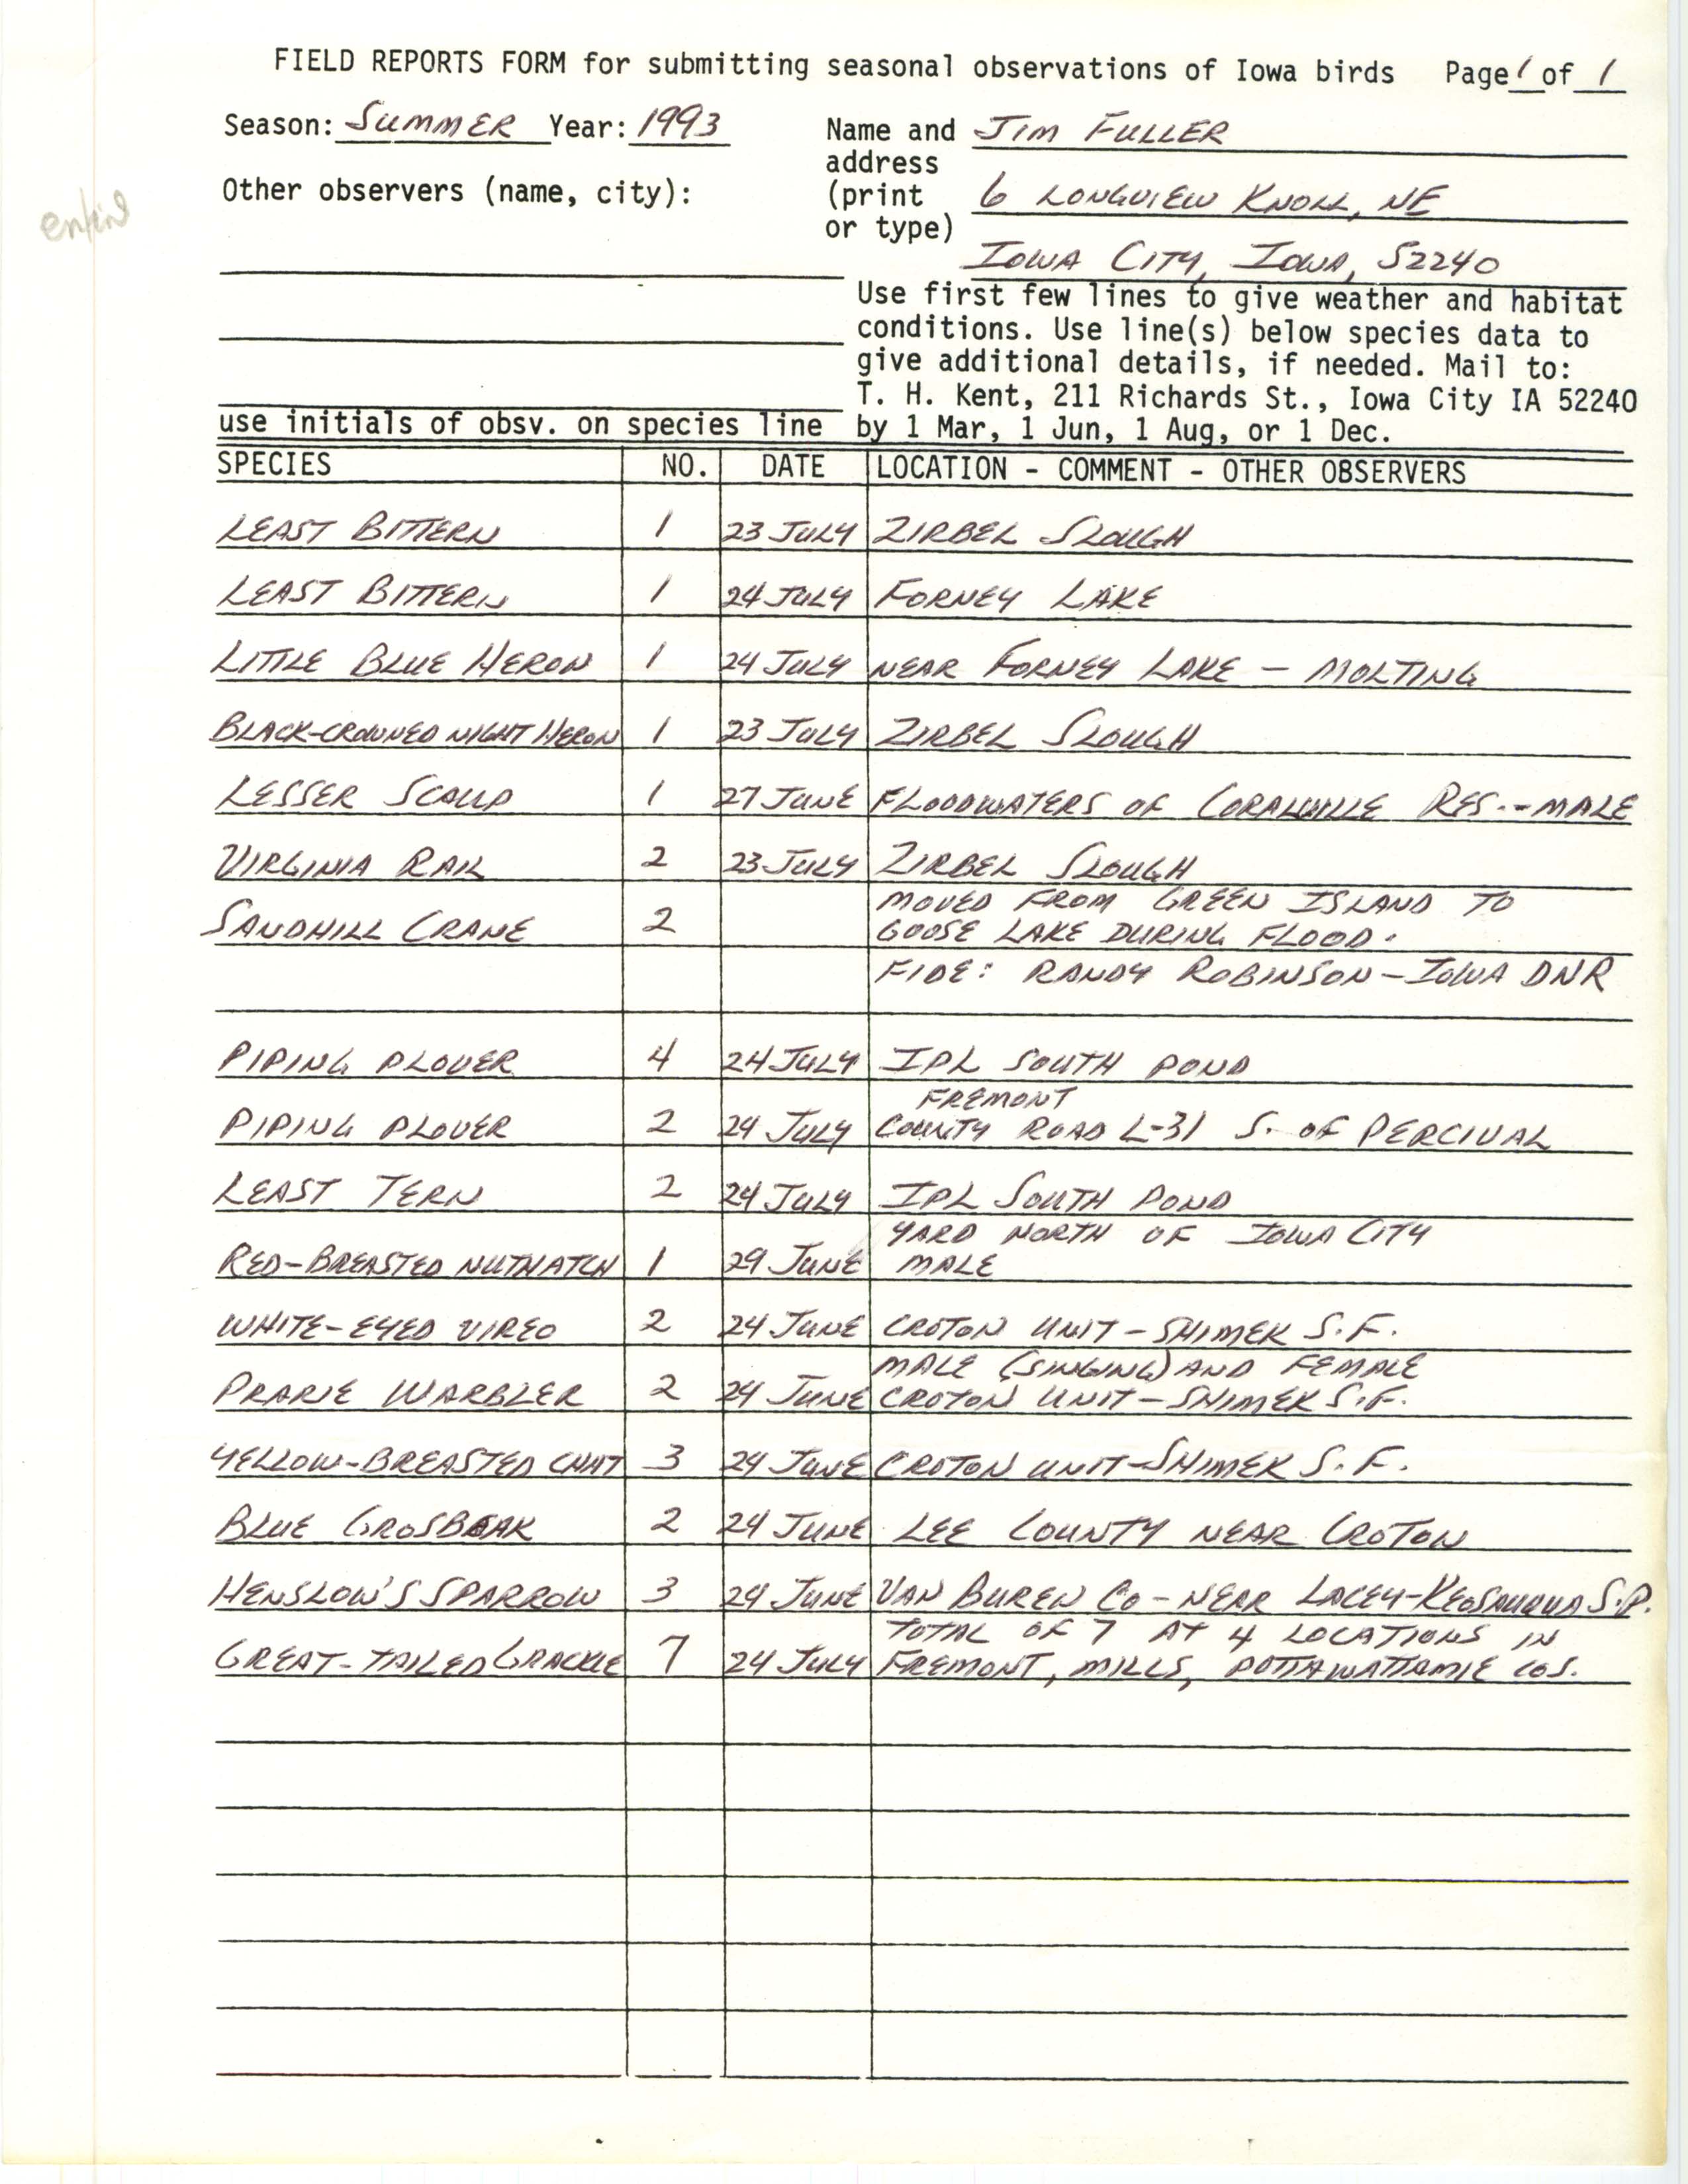 Field reports form for submitting seasonal observations of Iowa birds, James L. Fuller, summer 1993